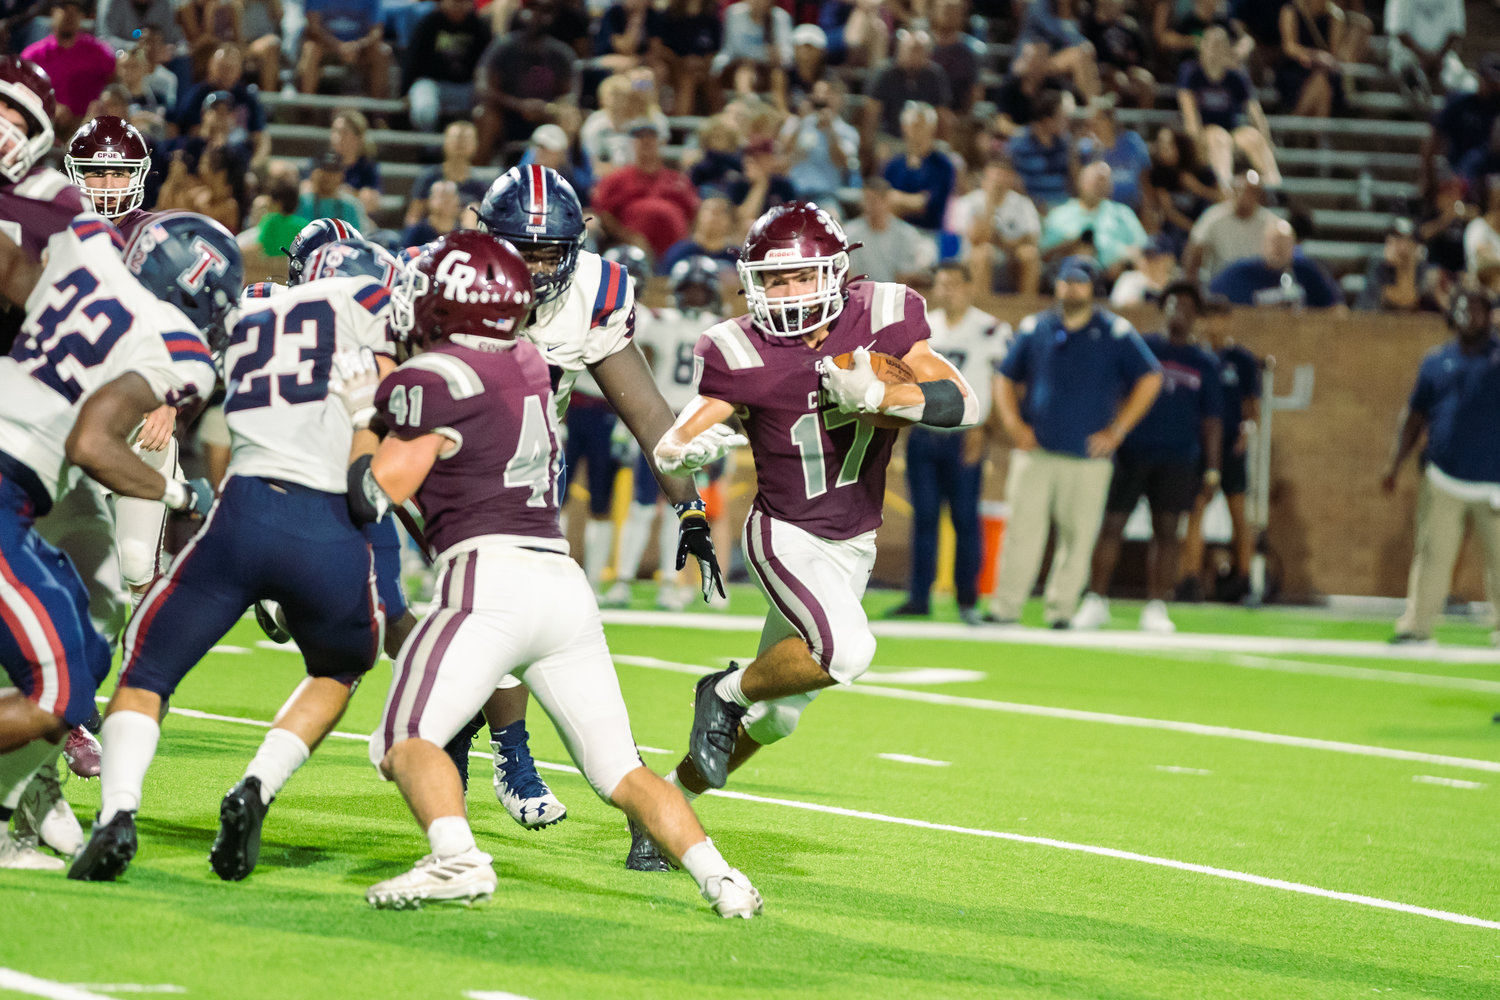 Cinco Ranch’s Eric Eckstrom breaks outside for extra yardage Cinco Ranch’s during Friday’s game between Cinco Ranch and Tompkins at Rhodes Stadium.